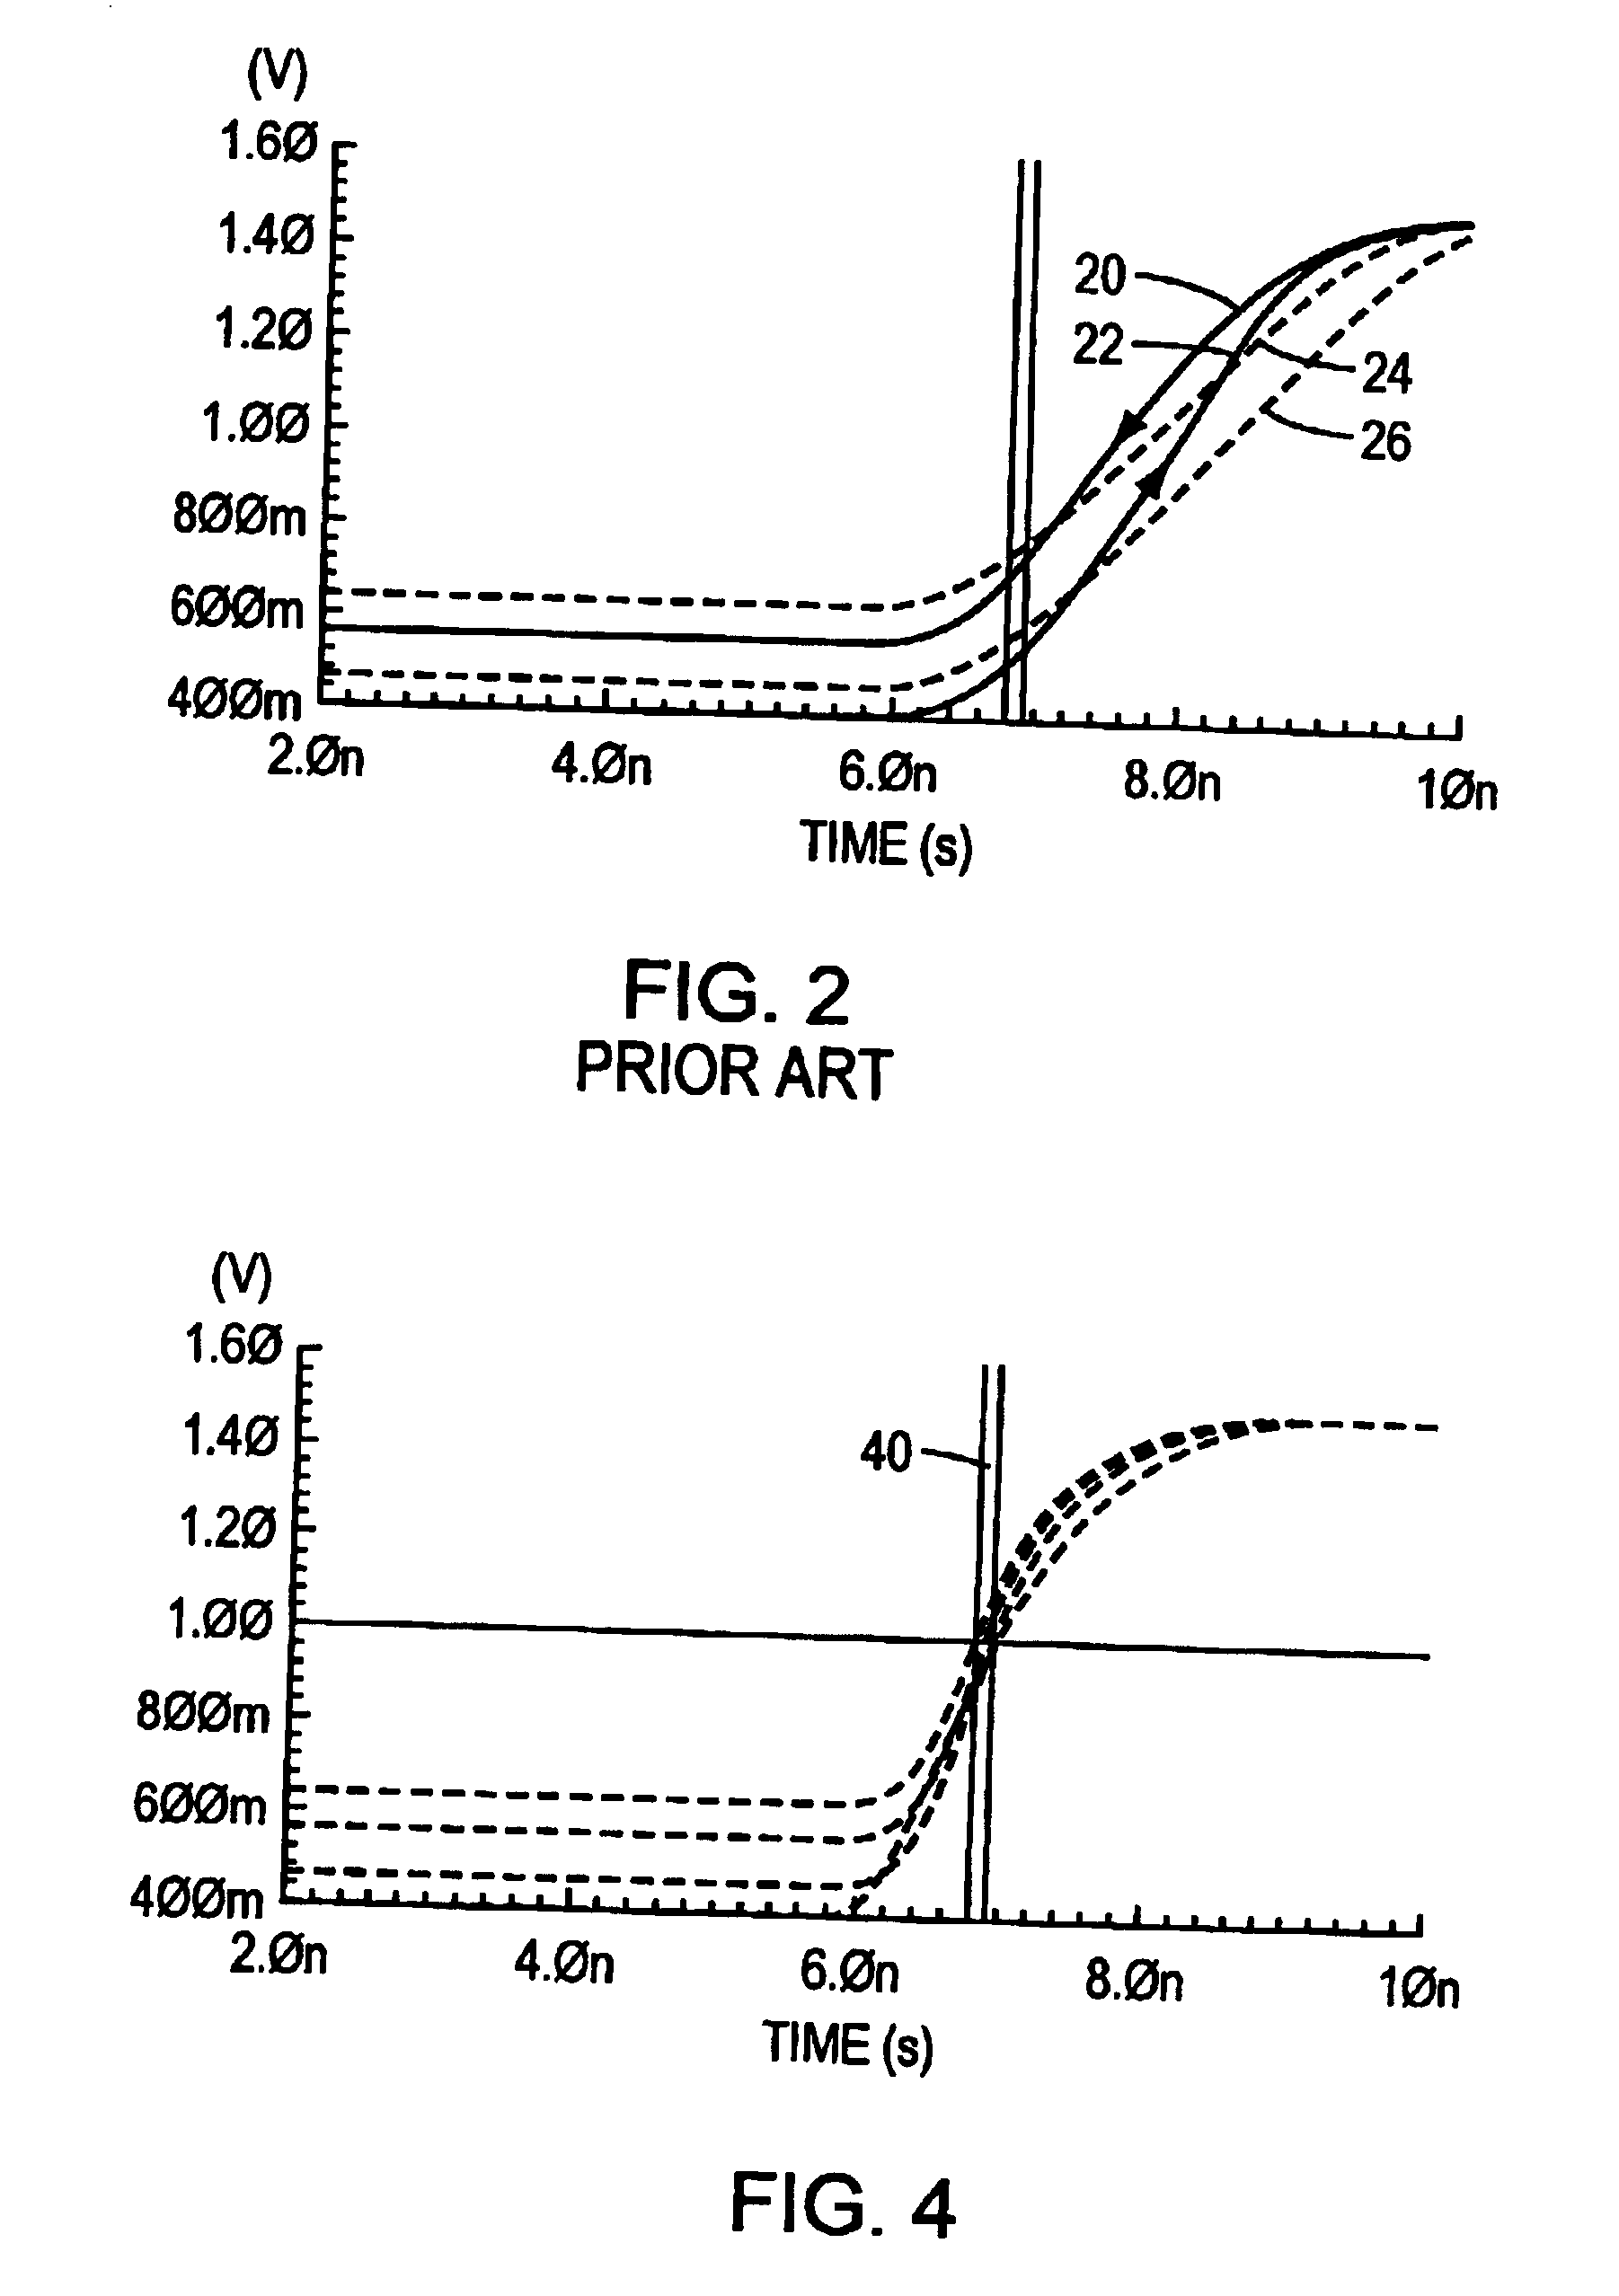 Method of reducing the propagation delay and process and temperature effects on a buffer